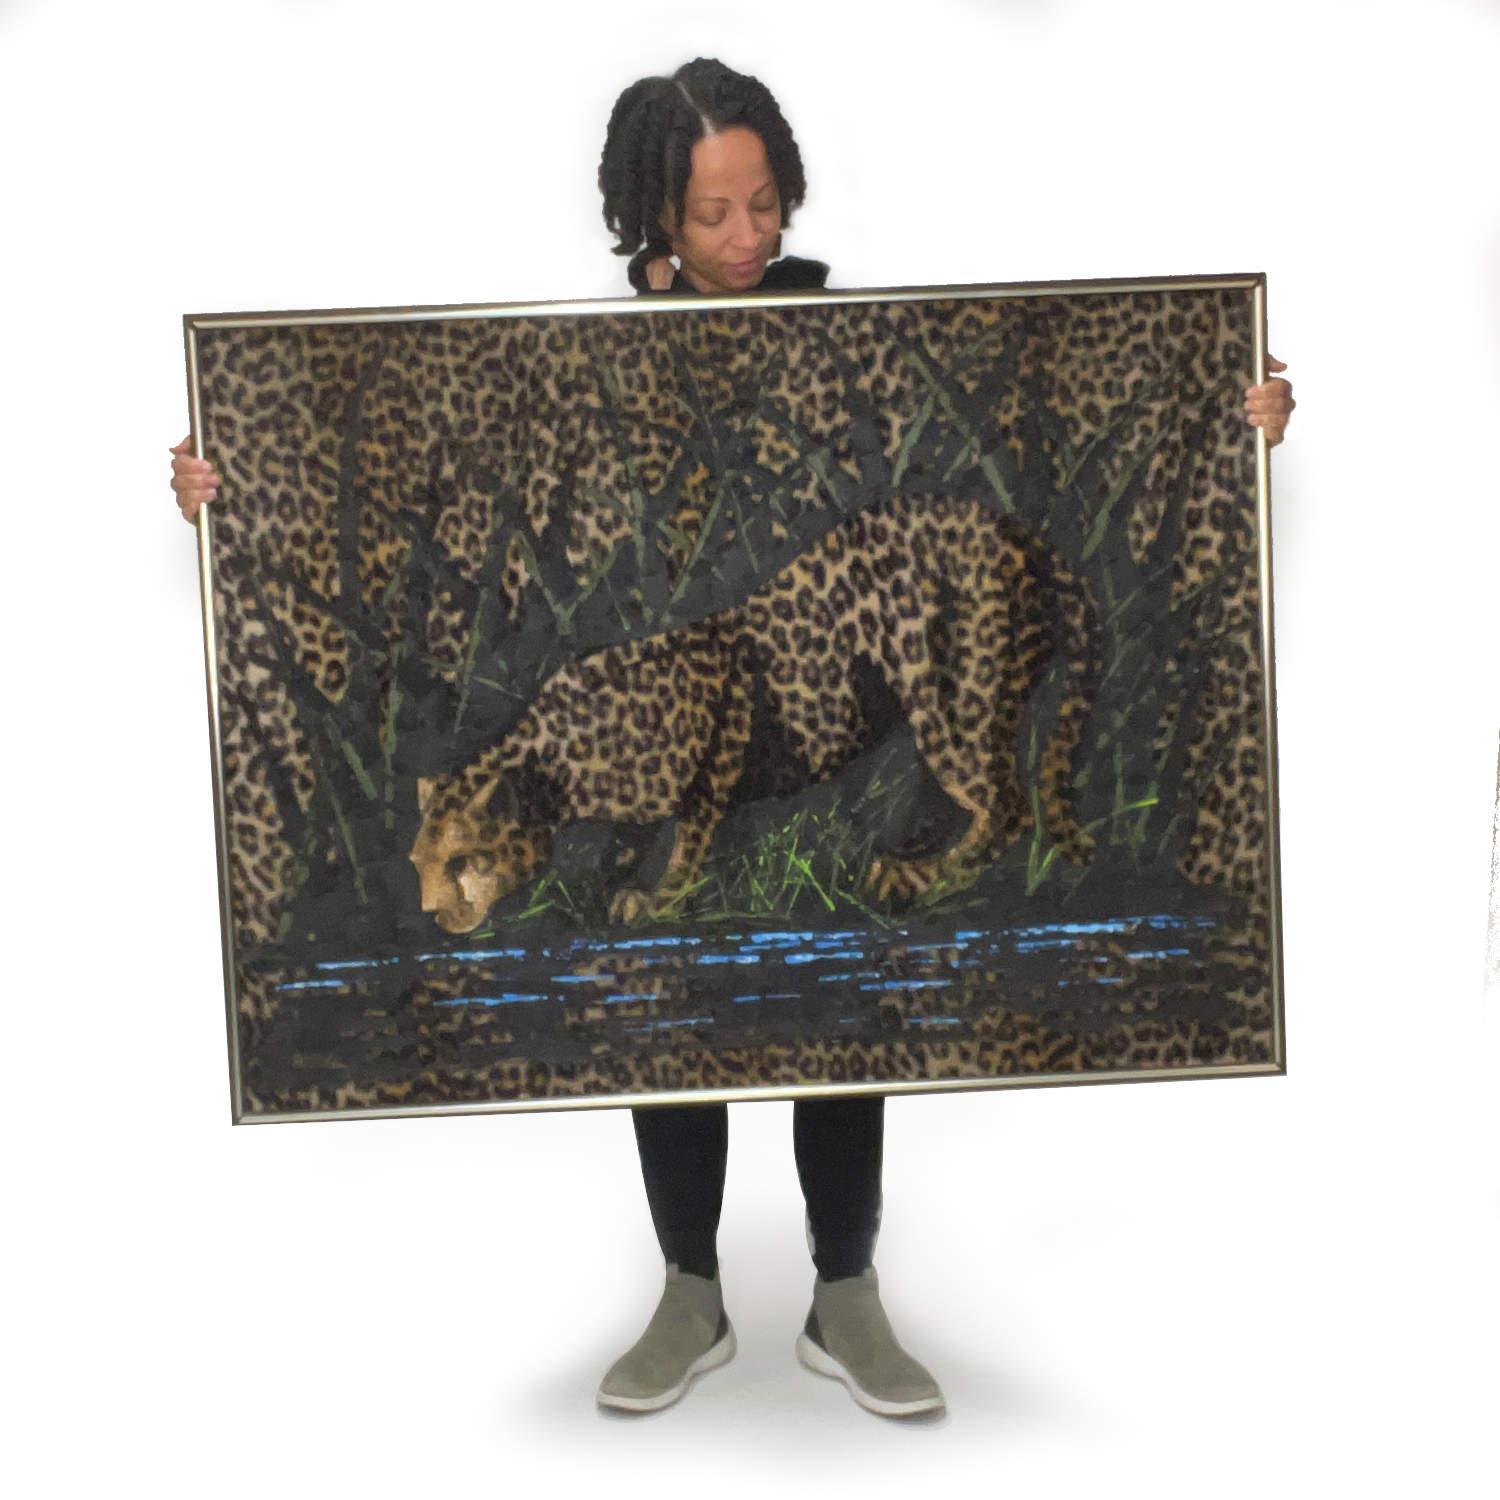 You may have seen velvet paintings… but have you seen a leopard painting on faux fur? This vintage 1970s big cat painting uses faux leopard fur as the canvas. Signed “Rodriguez” on the bottom left. The cat’s body is actually the faux leopard fur